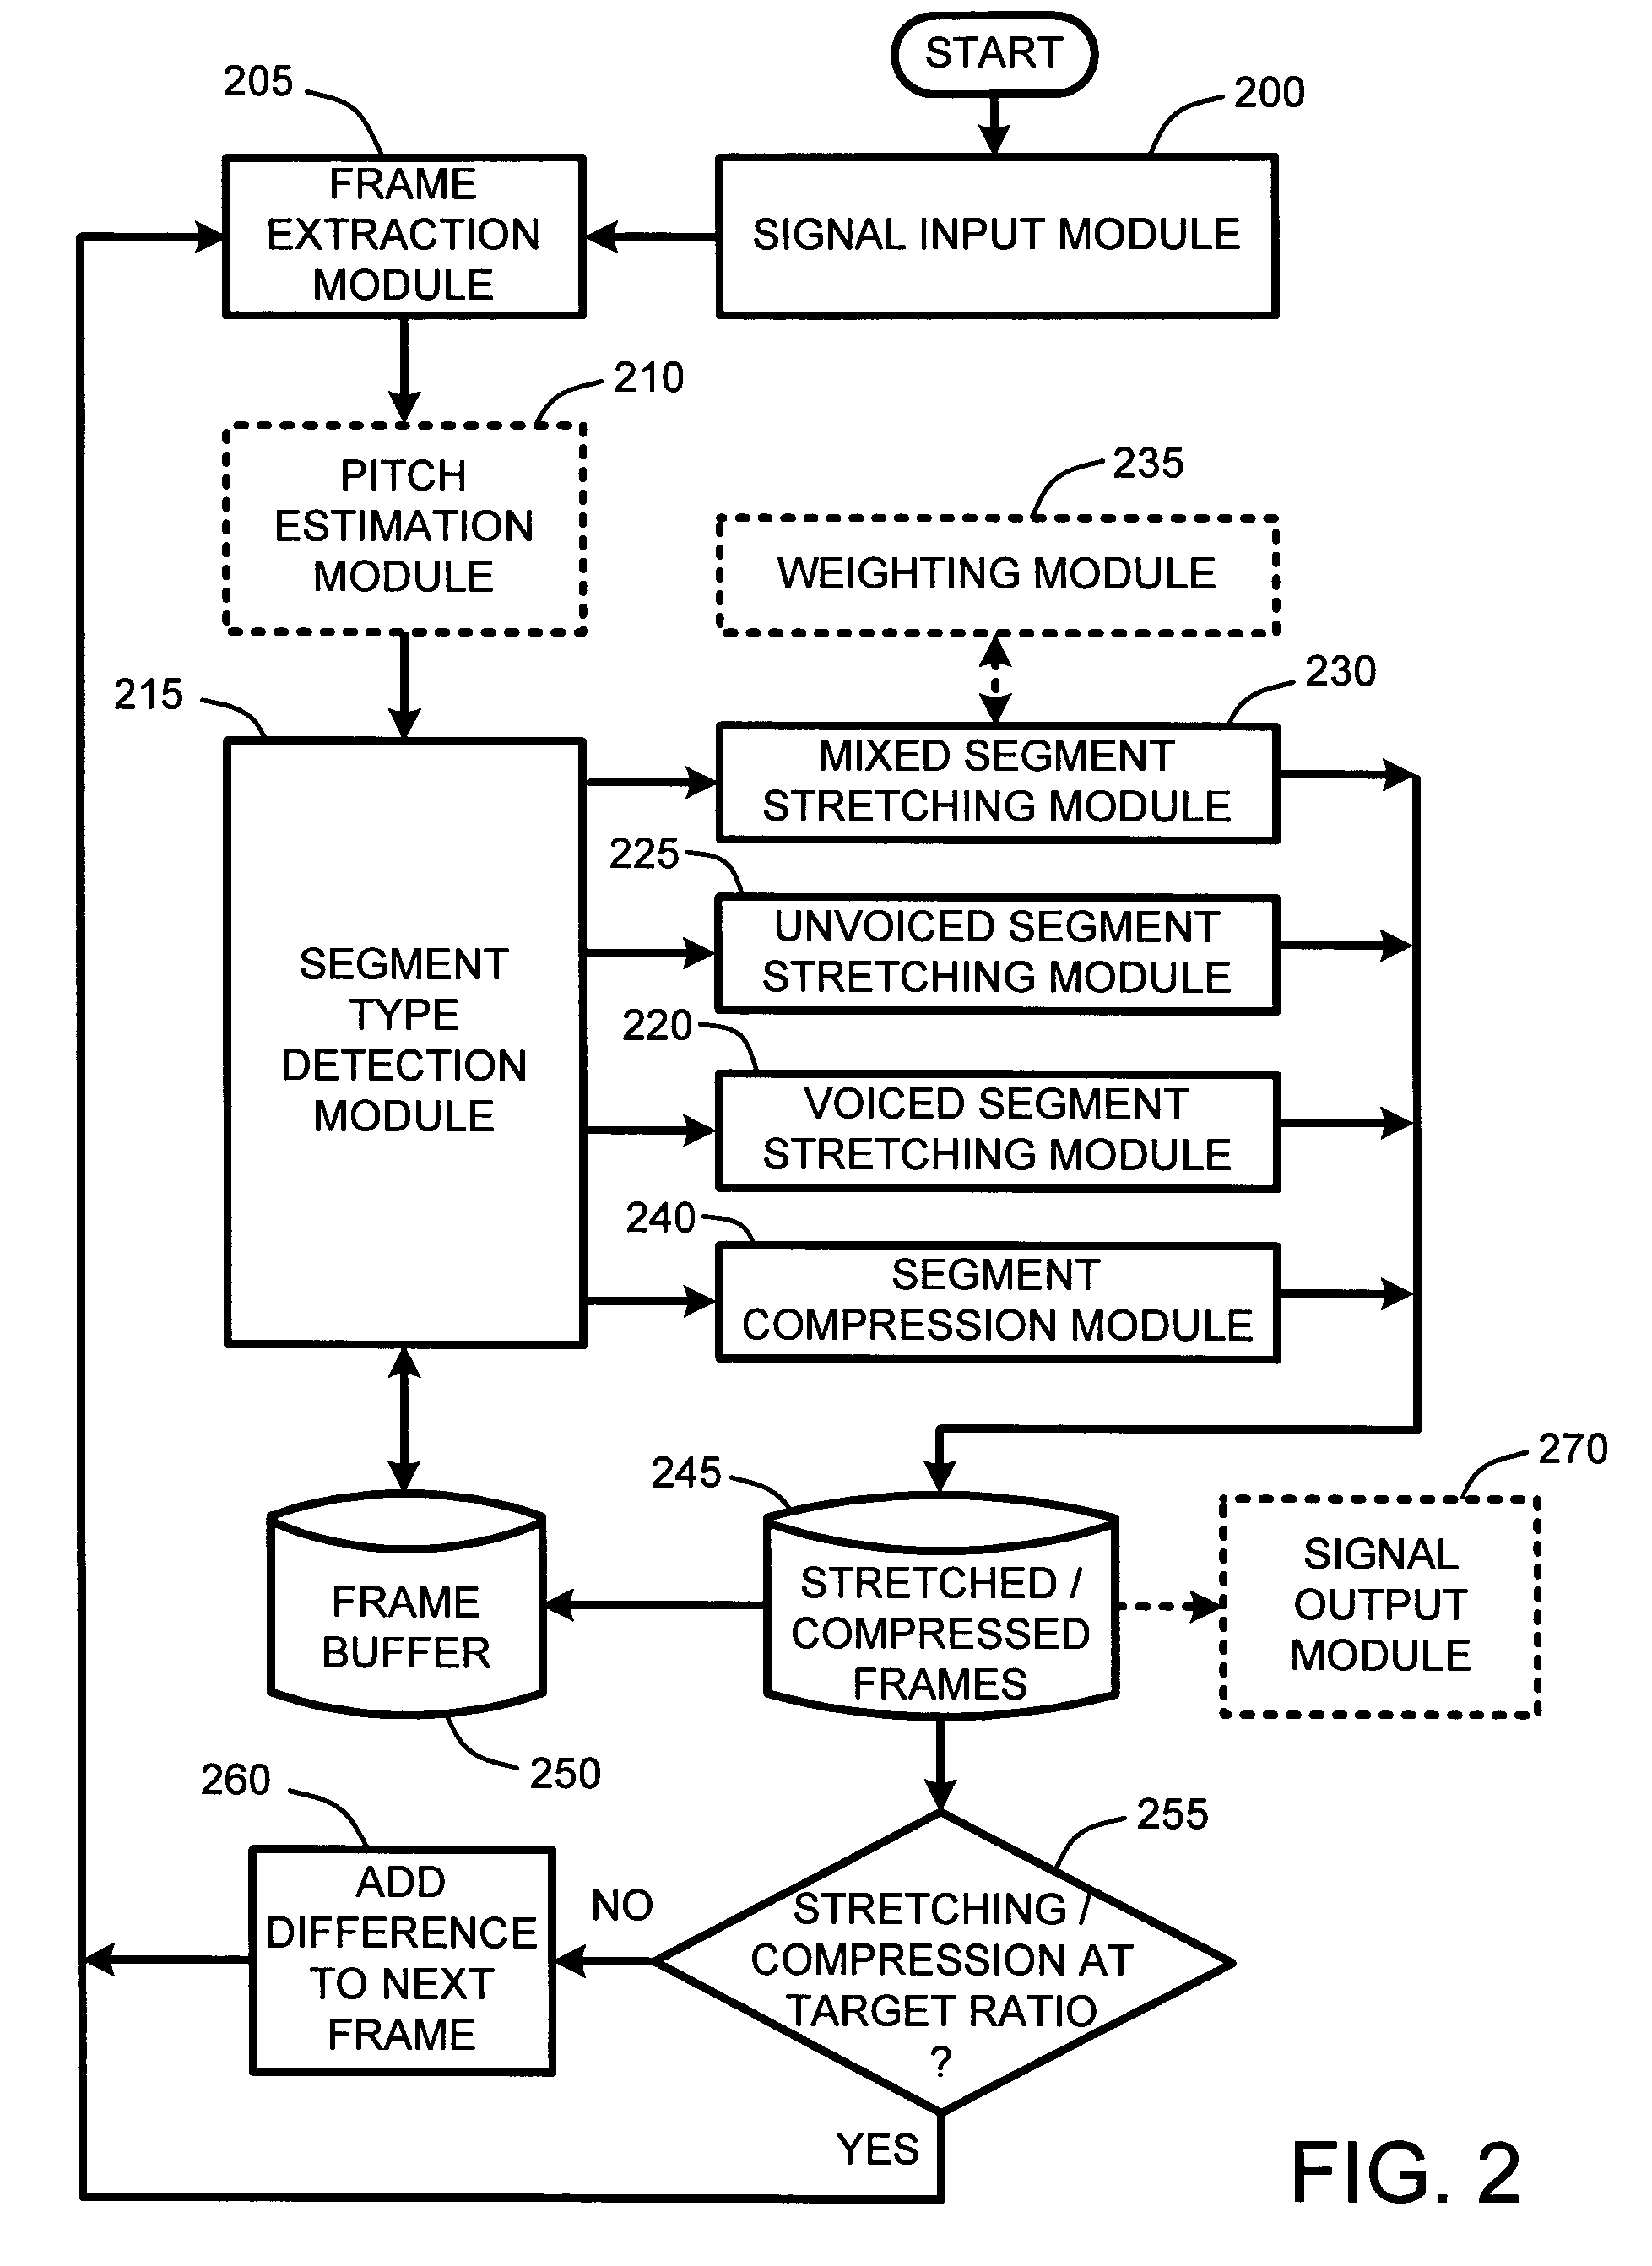 System and method for providing high-quality stretching and compression of a digital audio signal